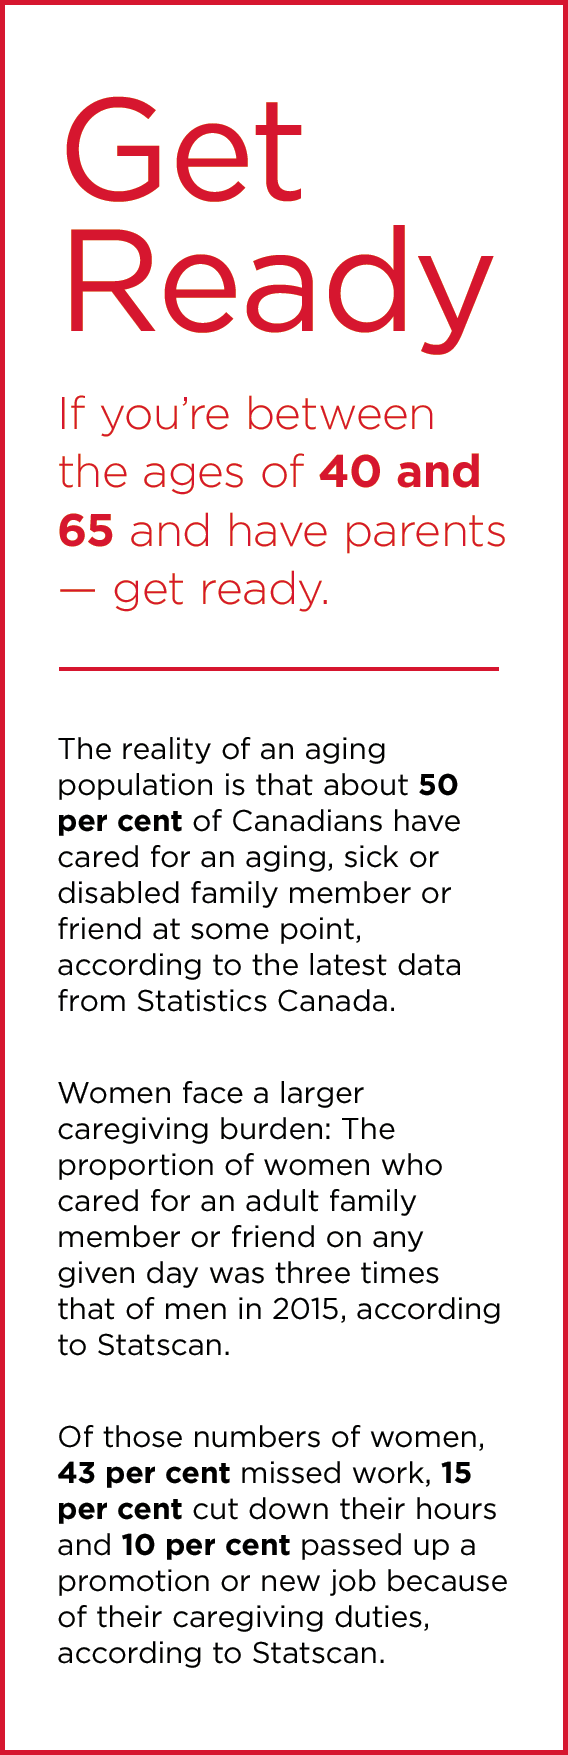 If you’re between the ages of 40 and 65 and have parents — get ready. According to StatsCan: the reality of an aging population is about 50% of Canadians have cared for an aging, sick or disabled family member or friend. Women face a larger caregiving burden: The proportion of women who cared for an adult family member was 3 times that of men in 2015. 43% missed work, 15% cut down their hours and 10% passed up a promotion or new job because of their caregiving duties.